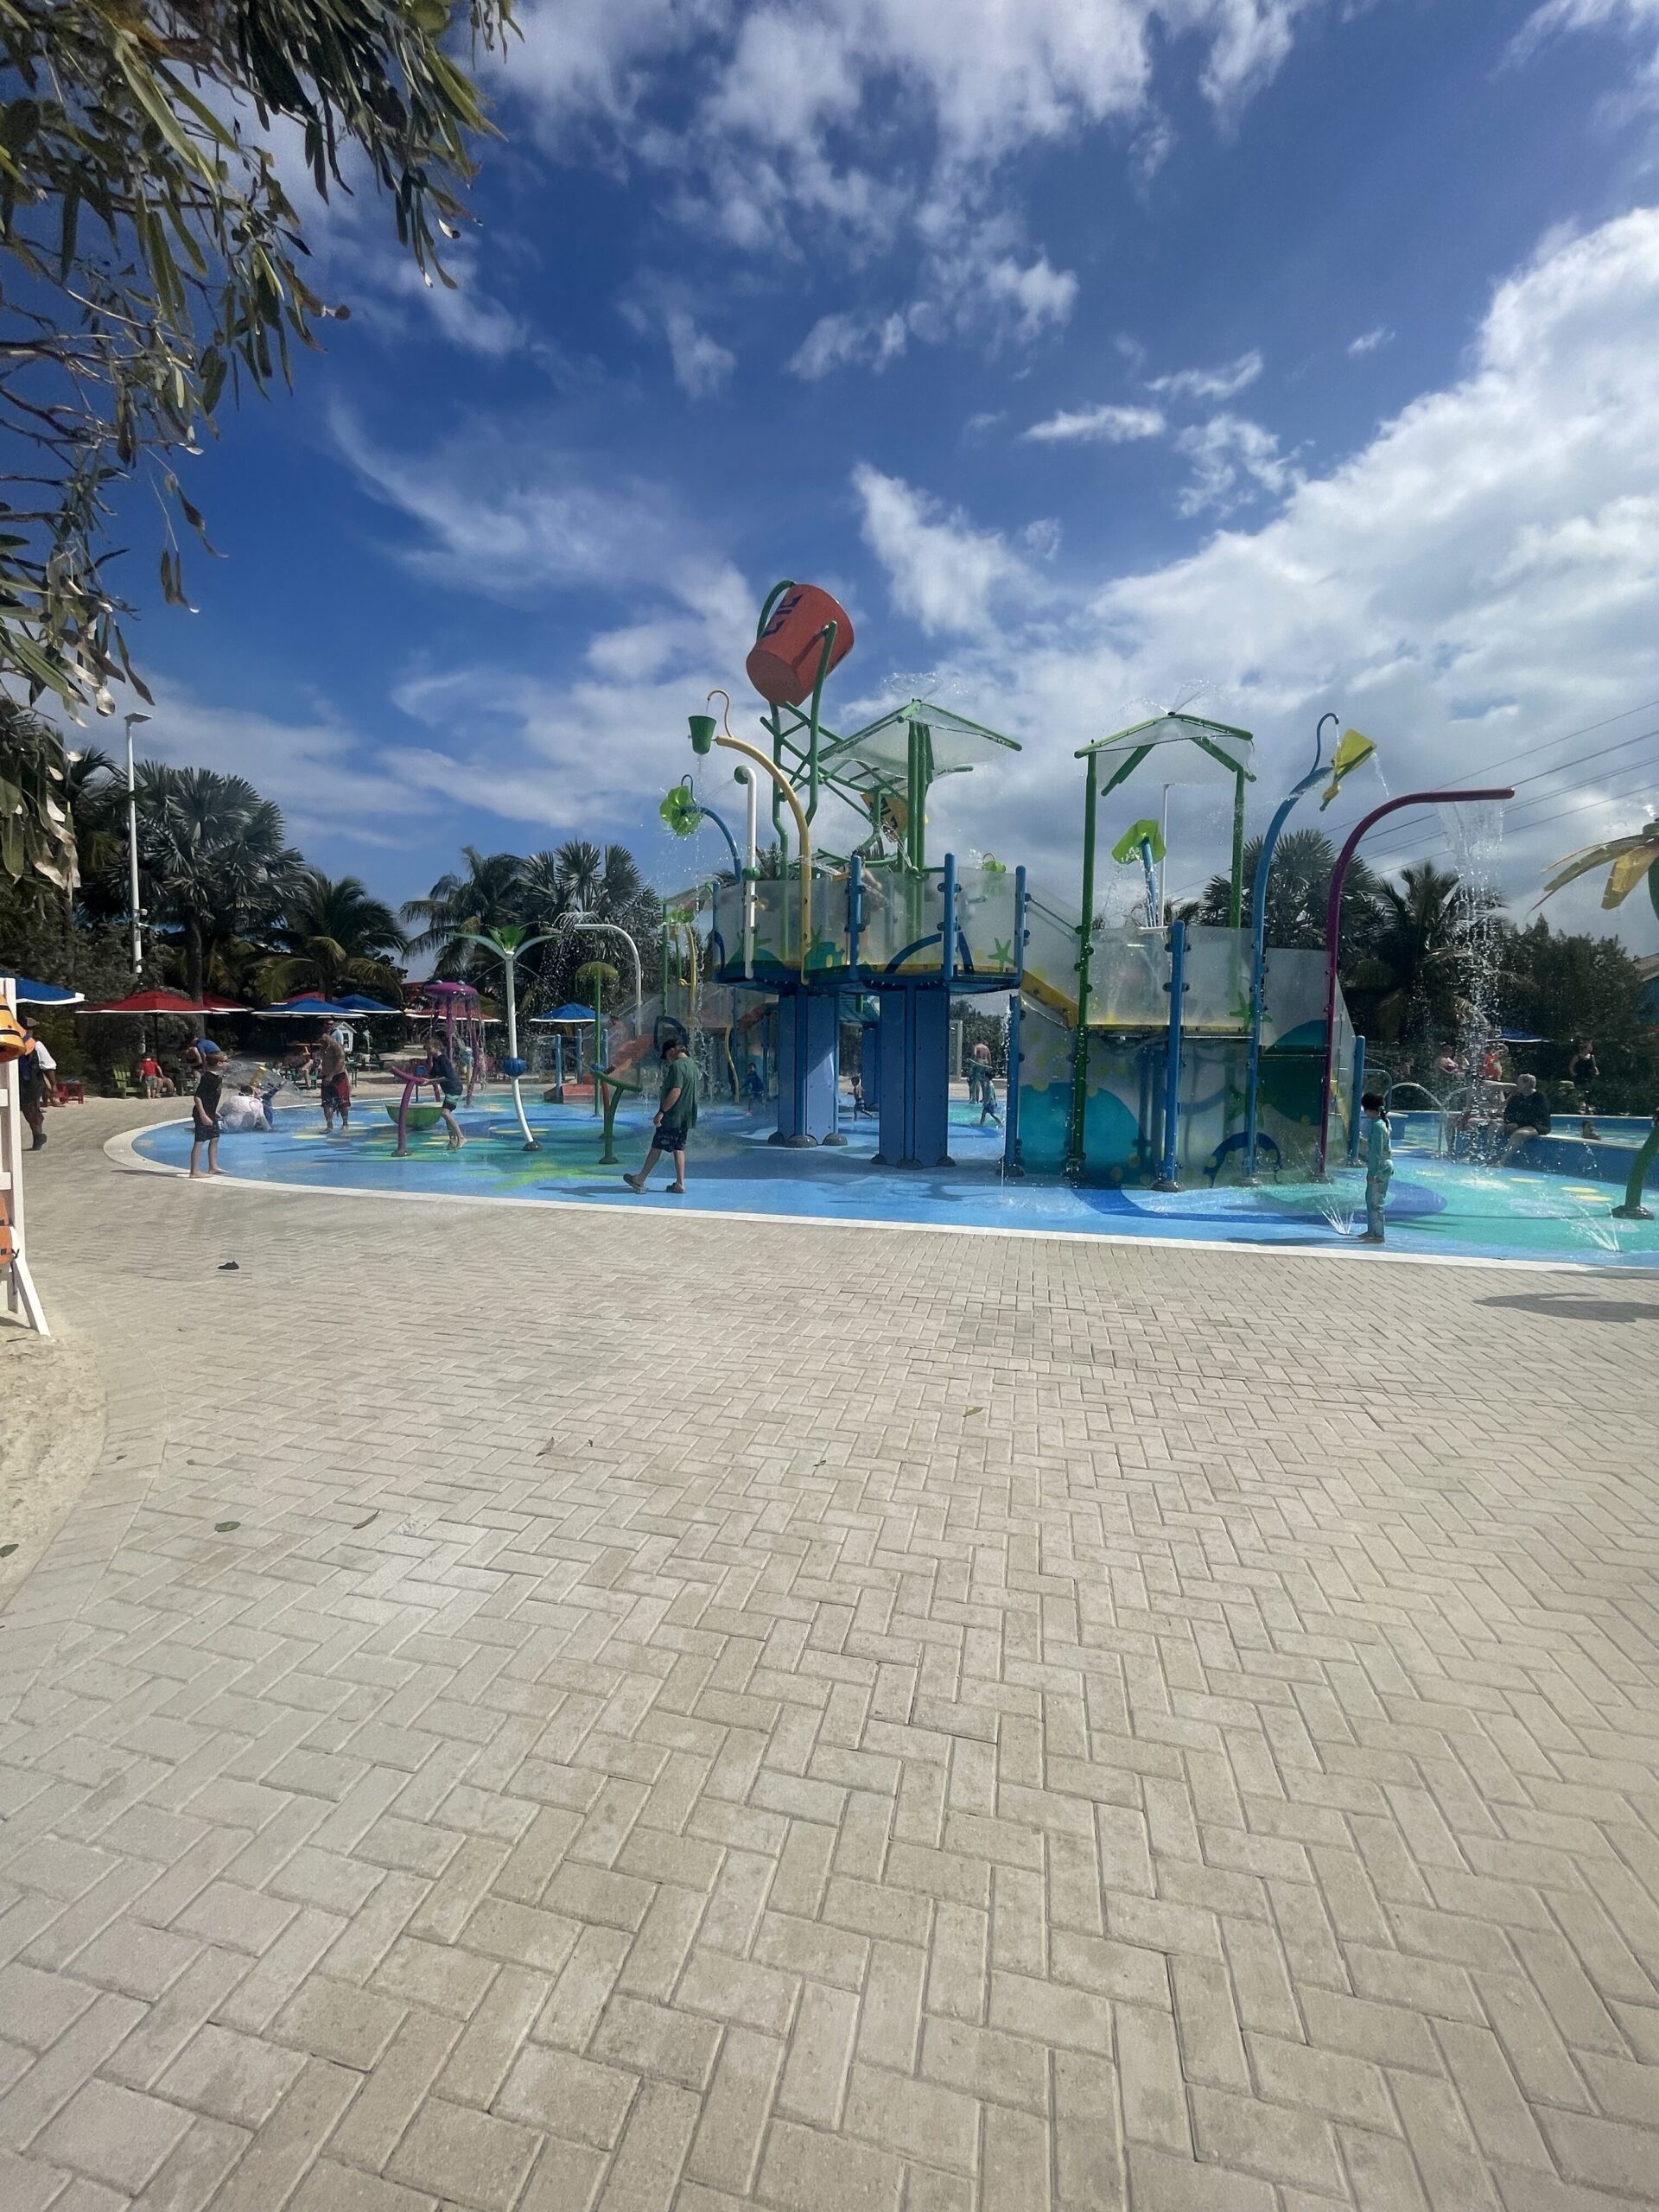 a water park with people playing in it